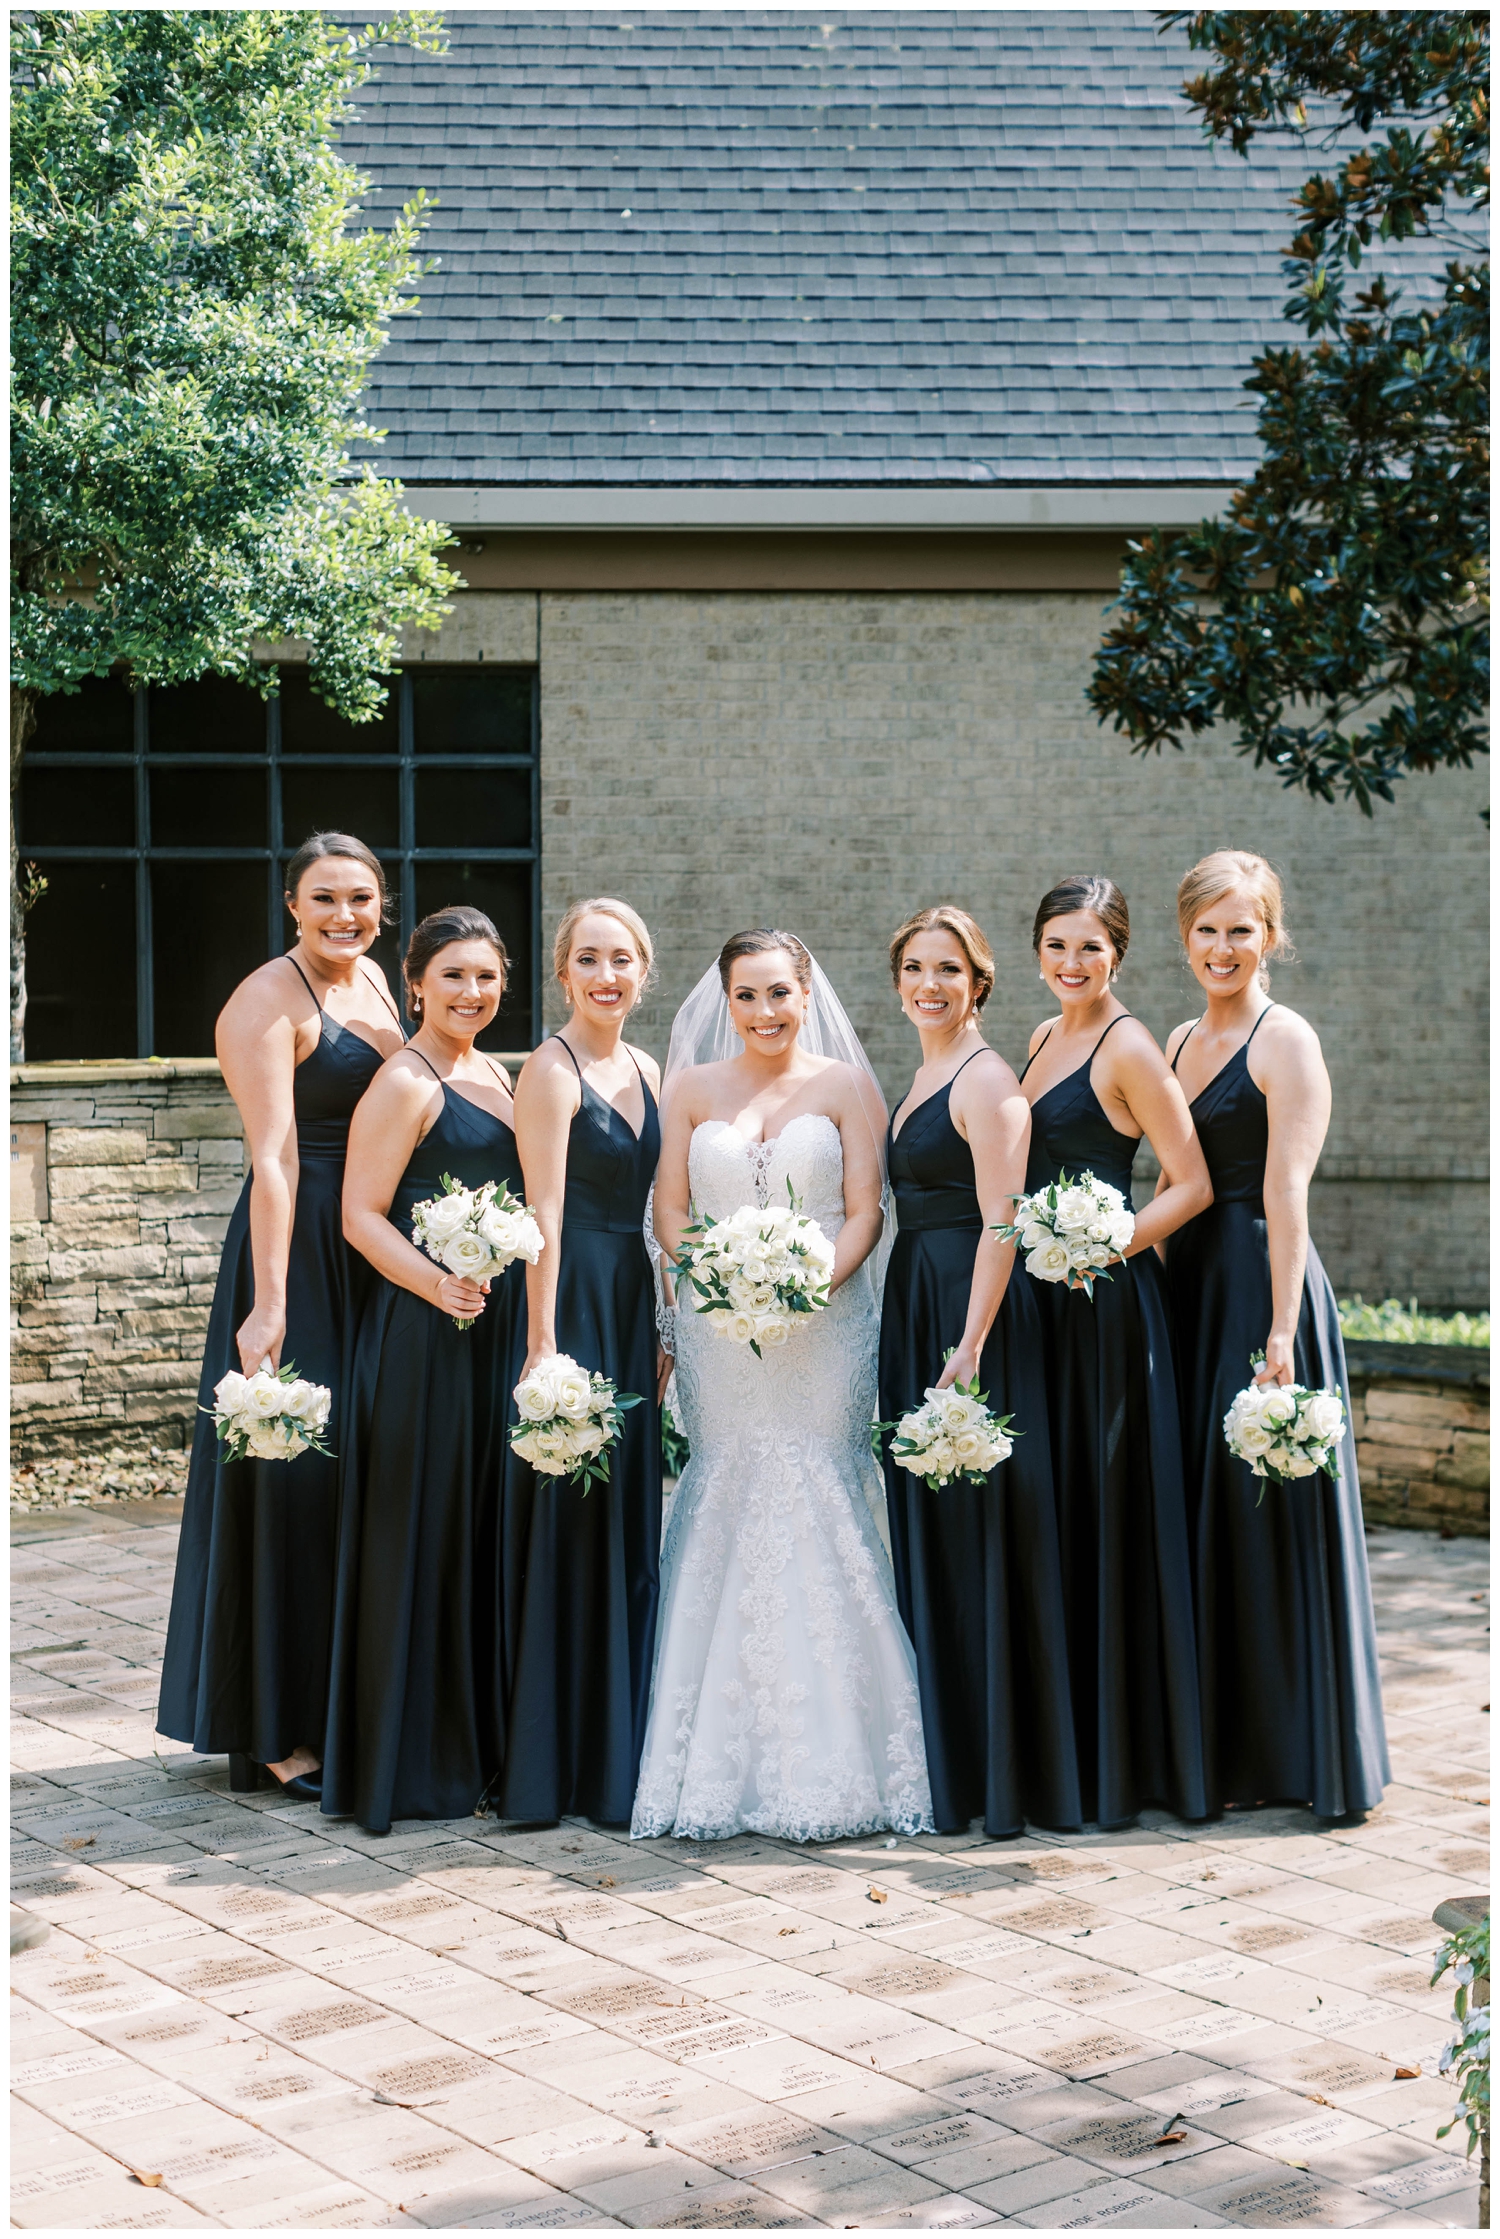 bride and bridesmaids in black dresses holding all white bouquets